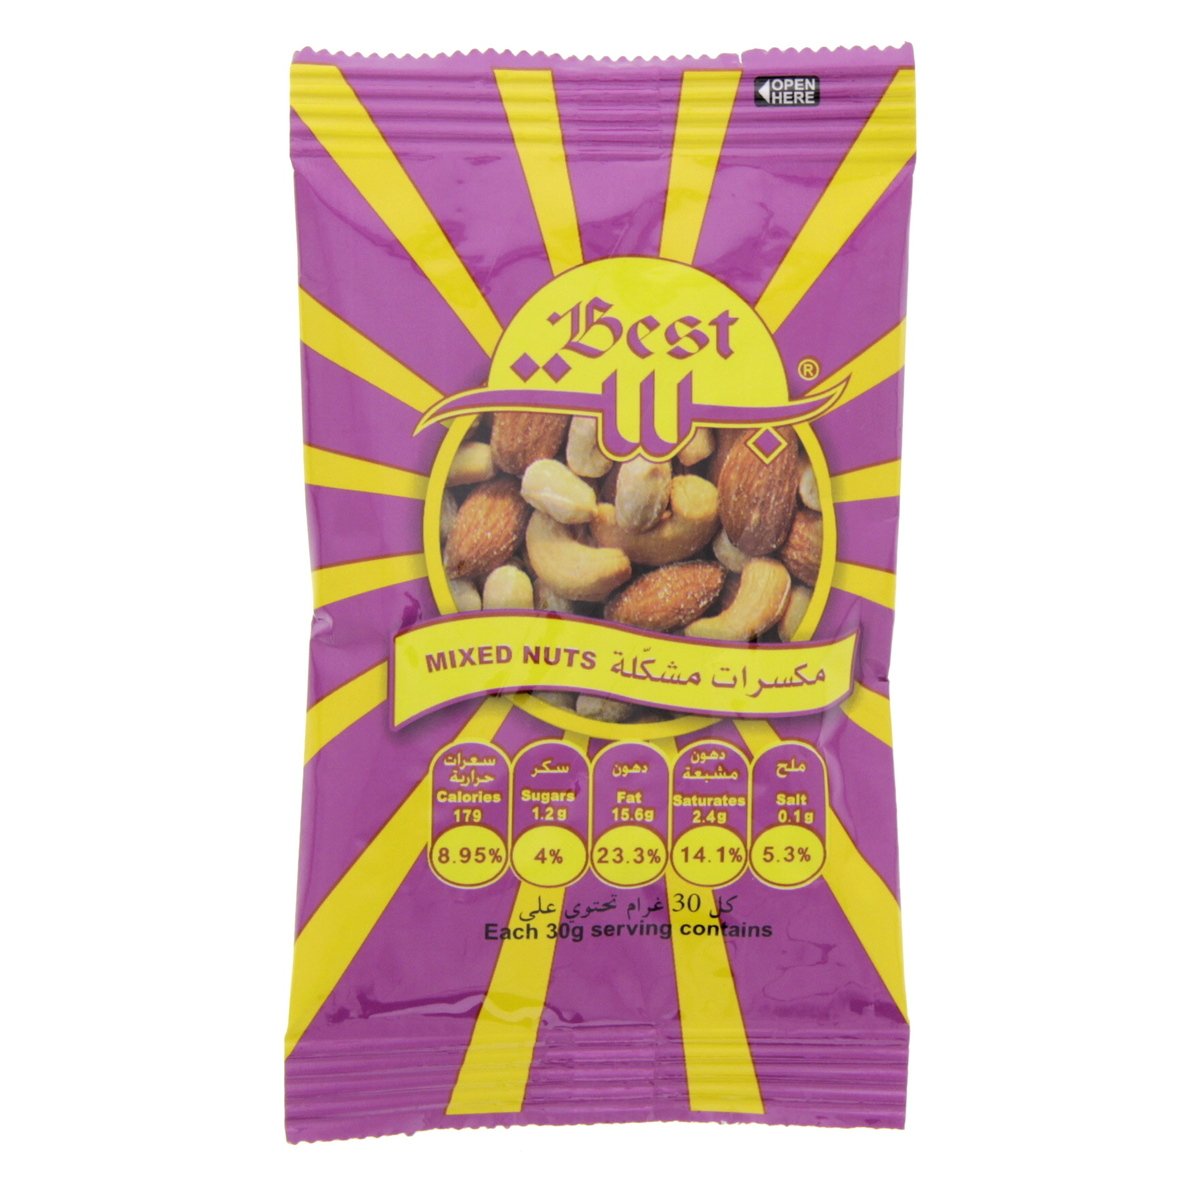 Best Mixed Nuts 12 x 20 g